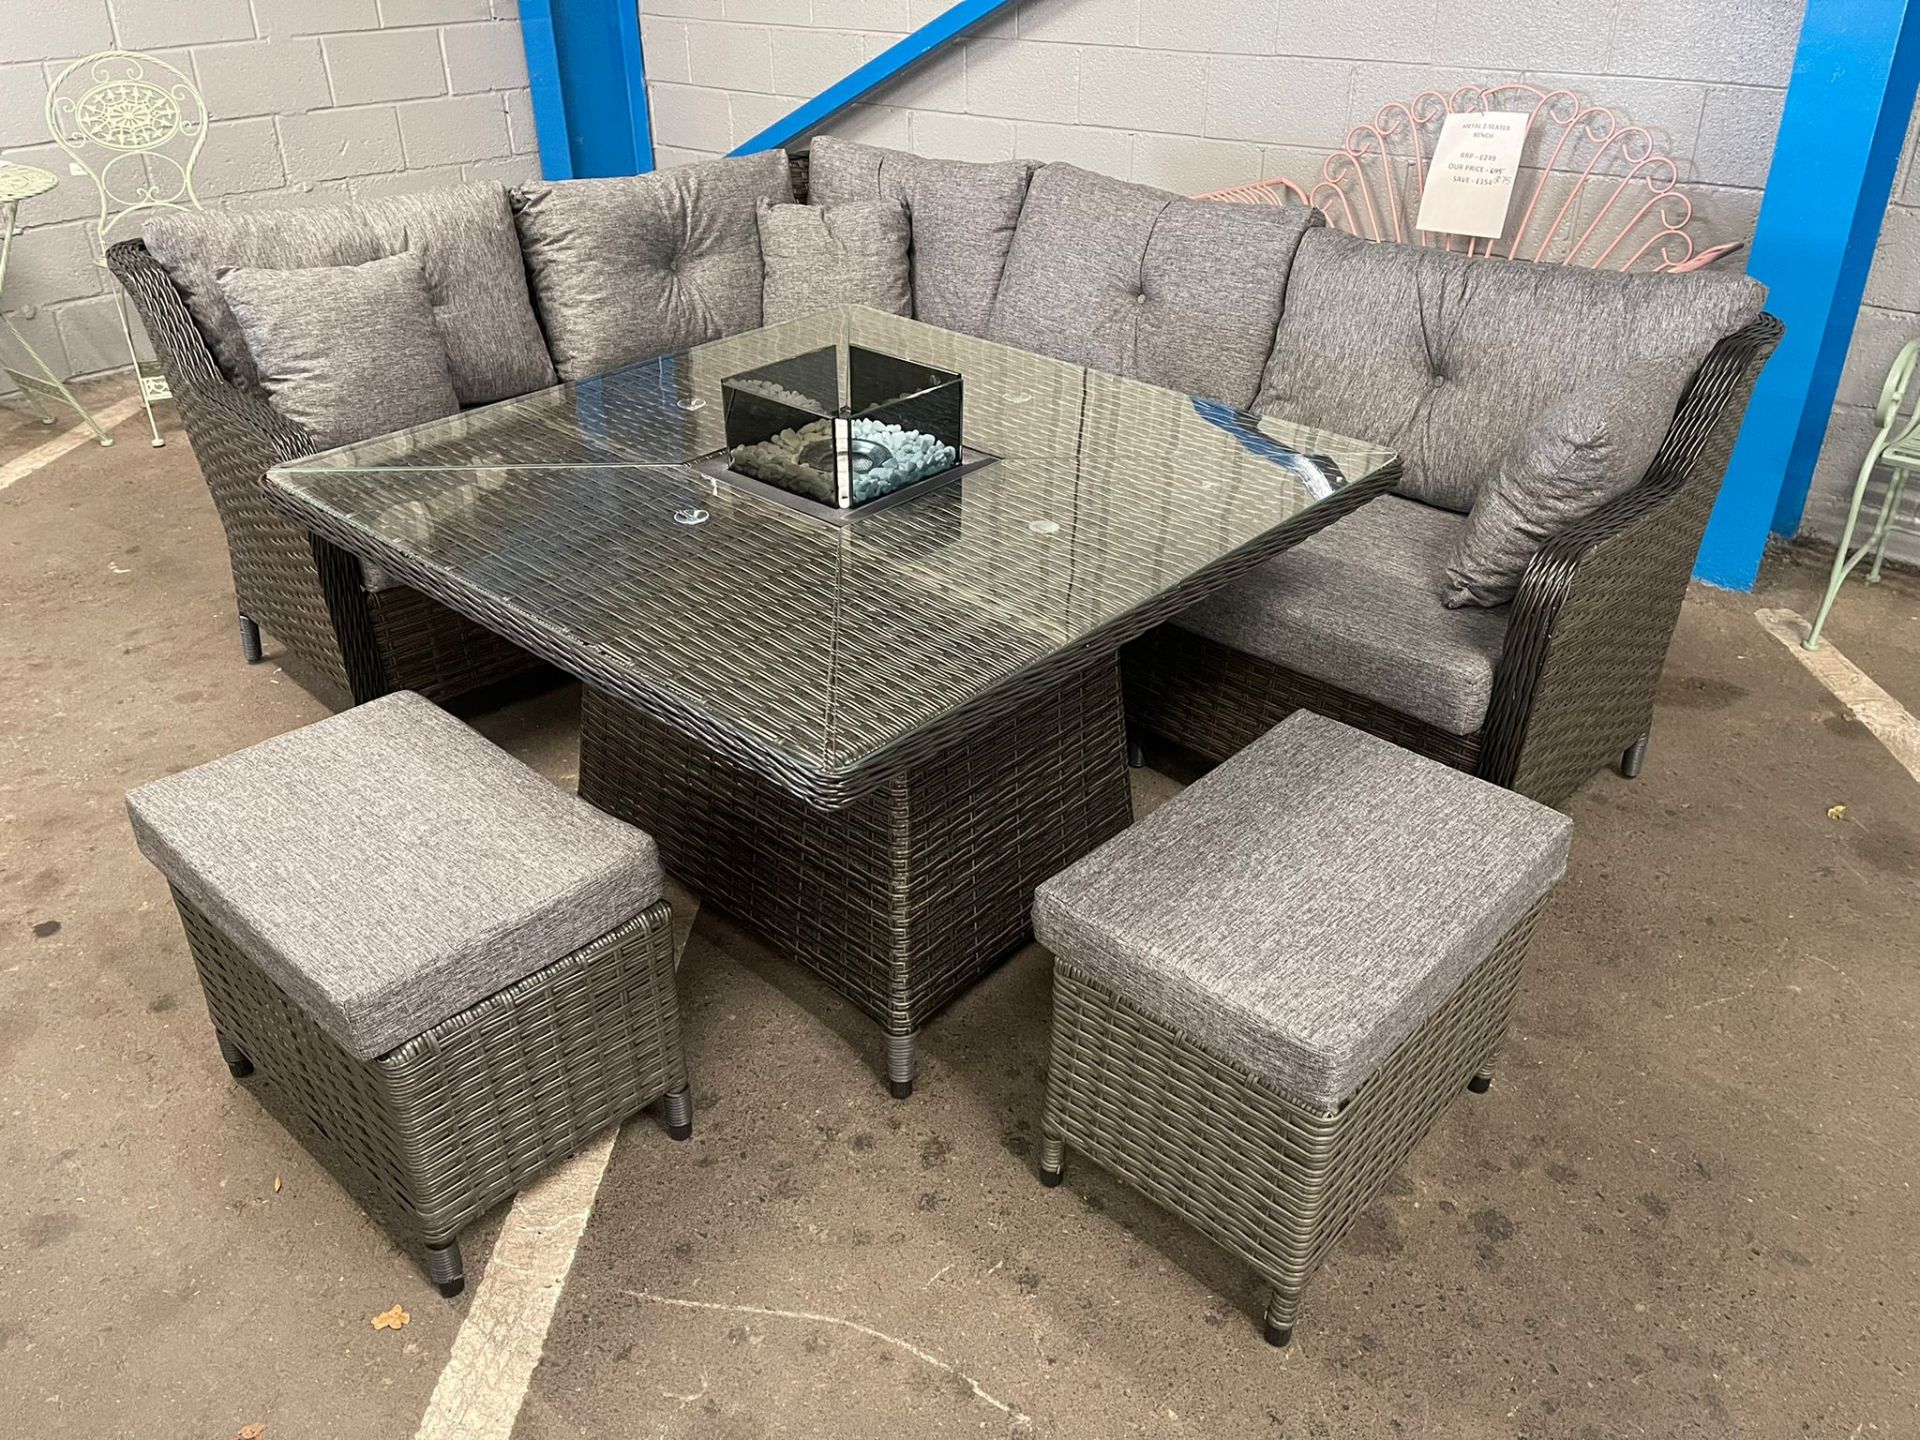 SRP £2250 - New Grey Six Seater Sofa Set With Dining Table With Burner & Two Stool - COLLECTION